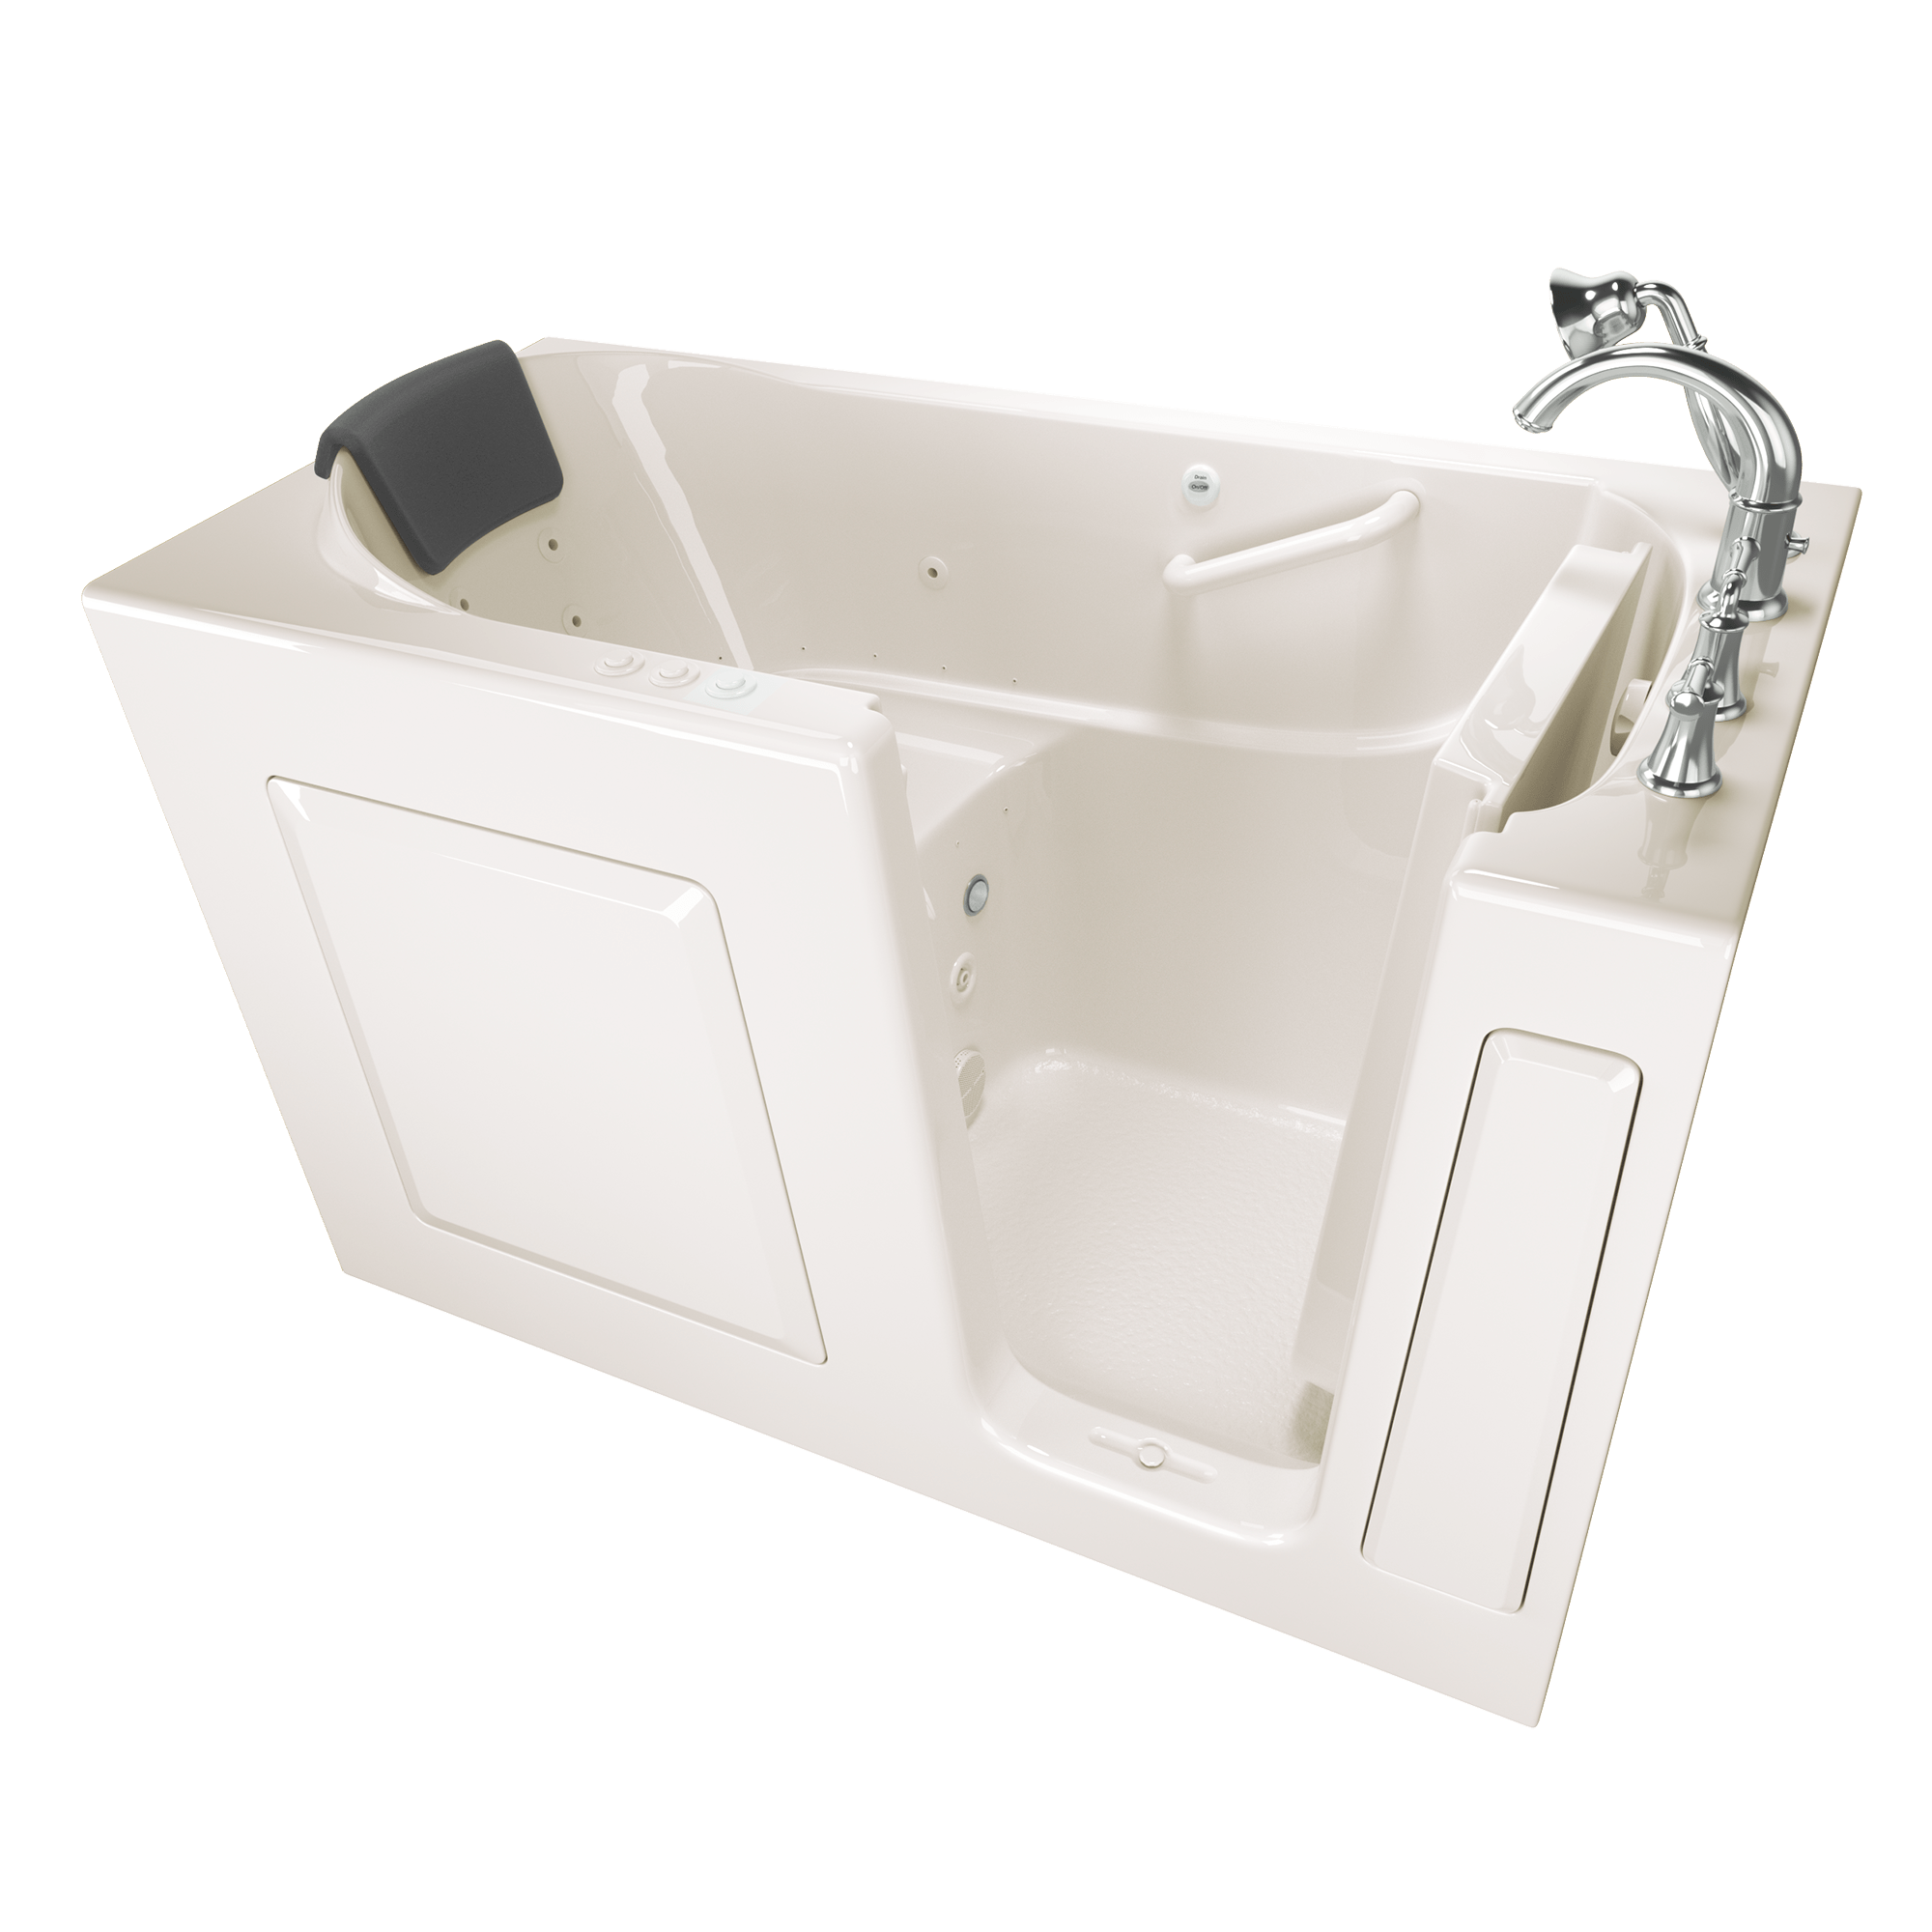 Gelcoat Premium Series 60x30 Inch Walk In Bathtub with Dual Air Massage and Jet Massage System   Right Hand Door and Drain ST BISCUIT